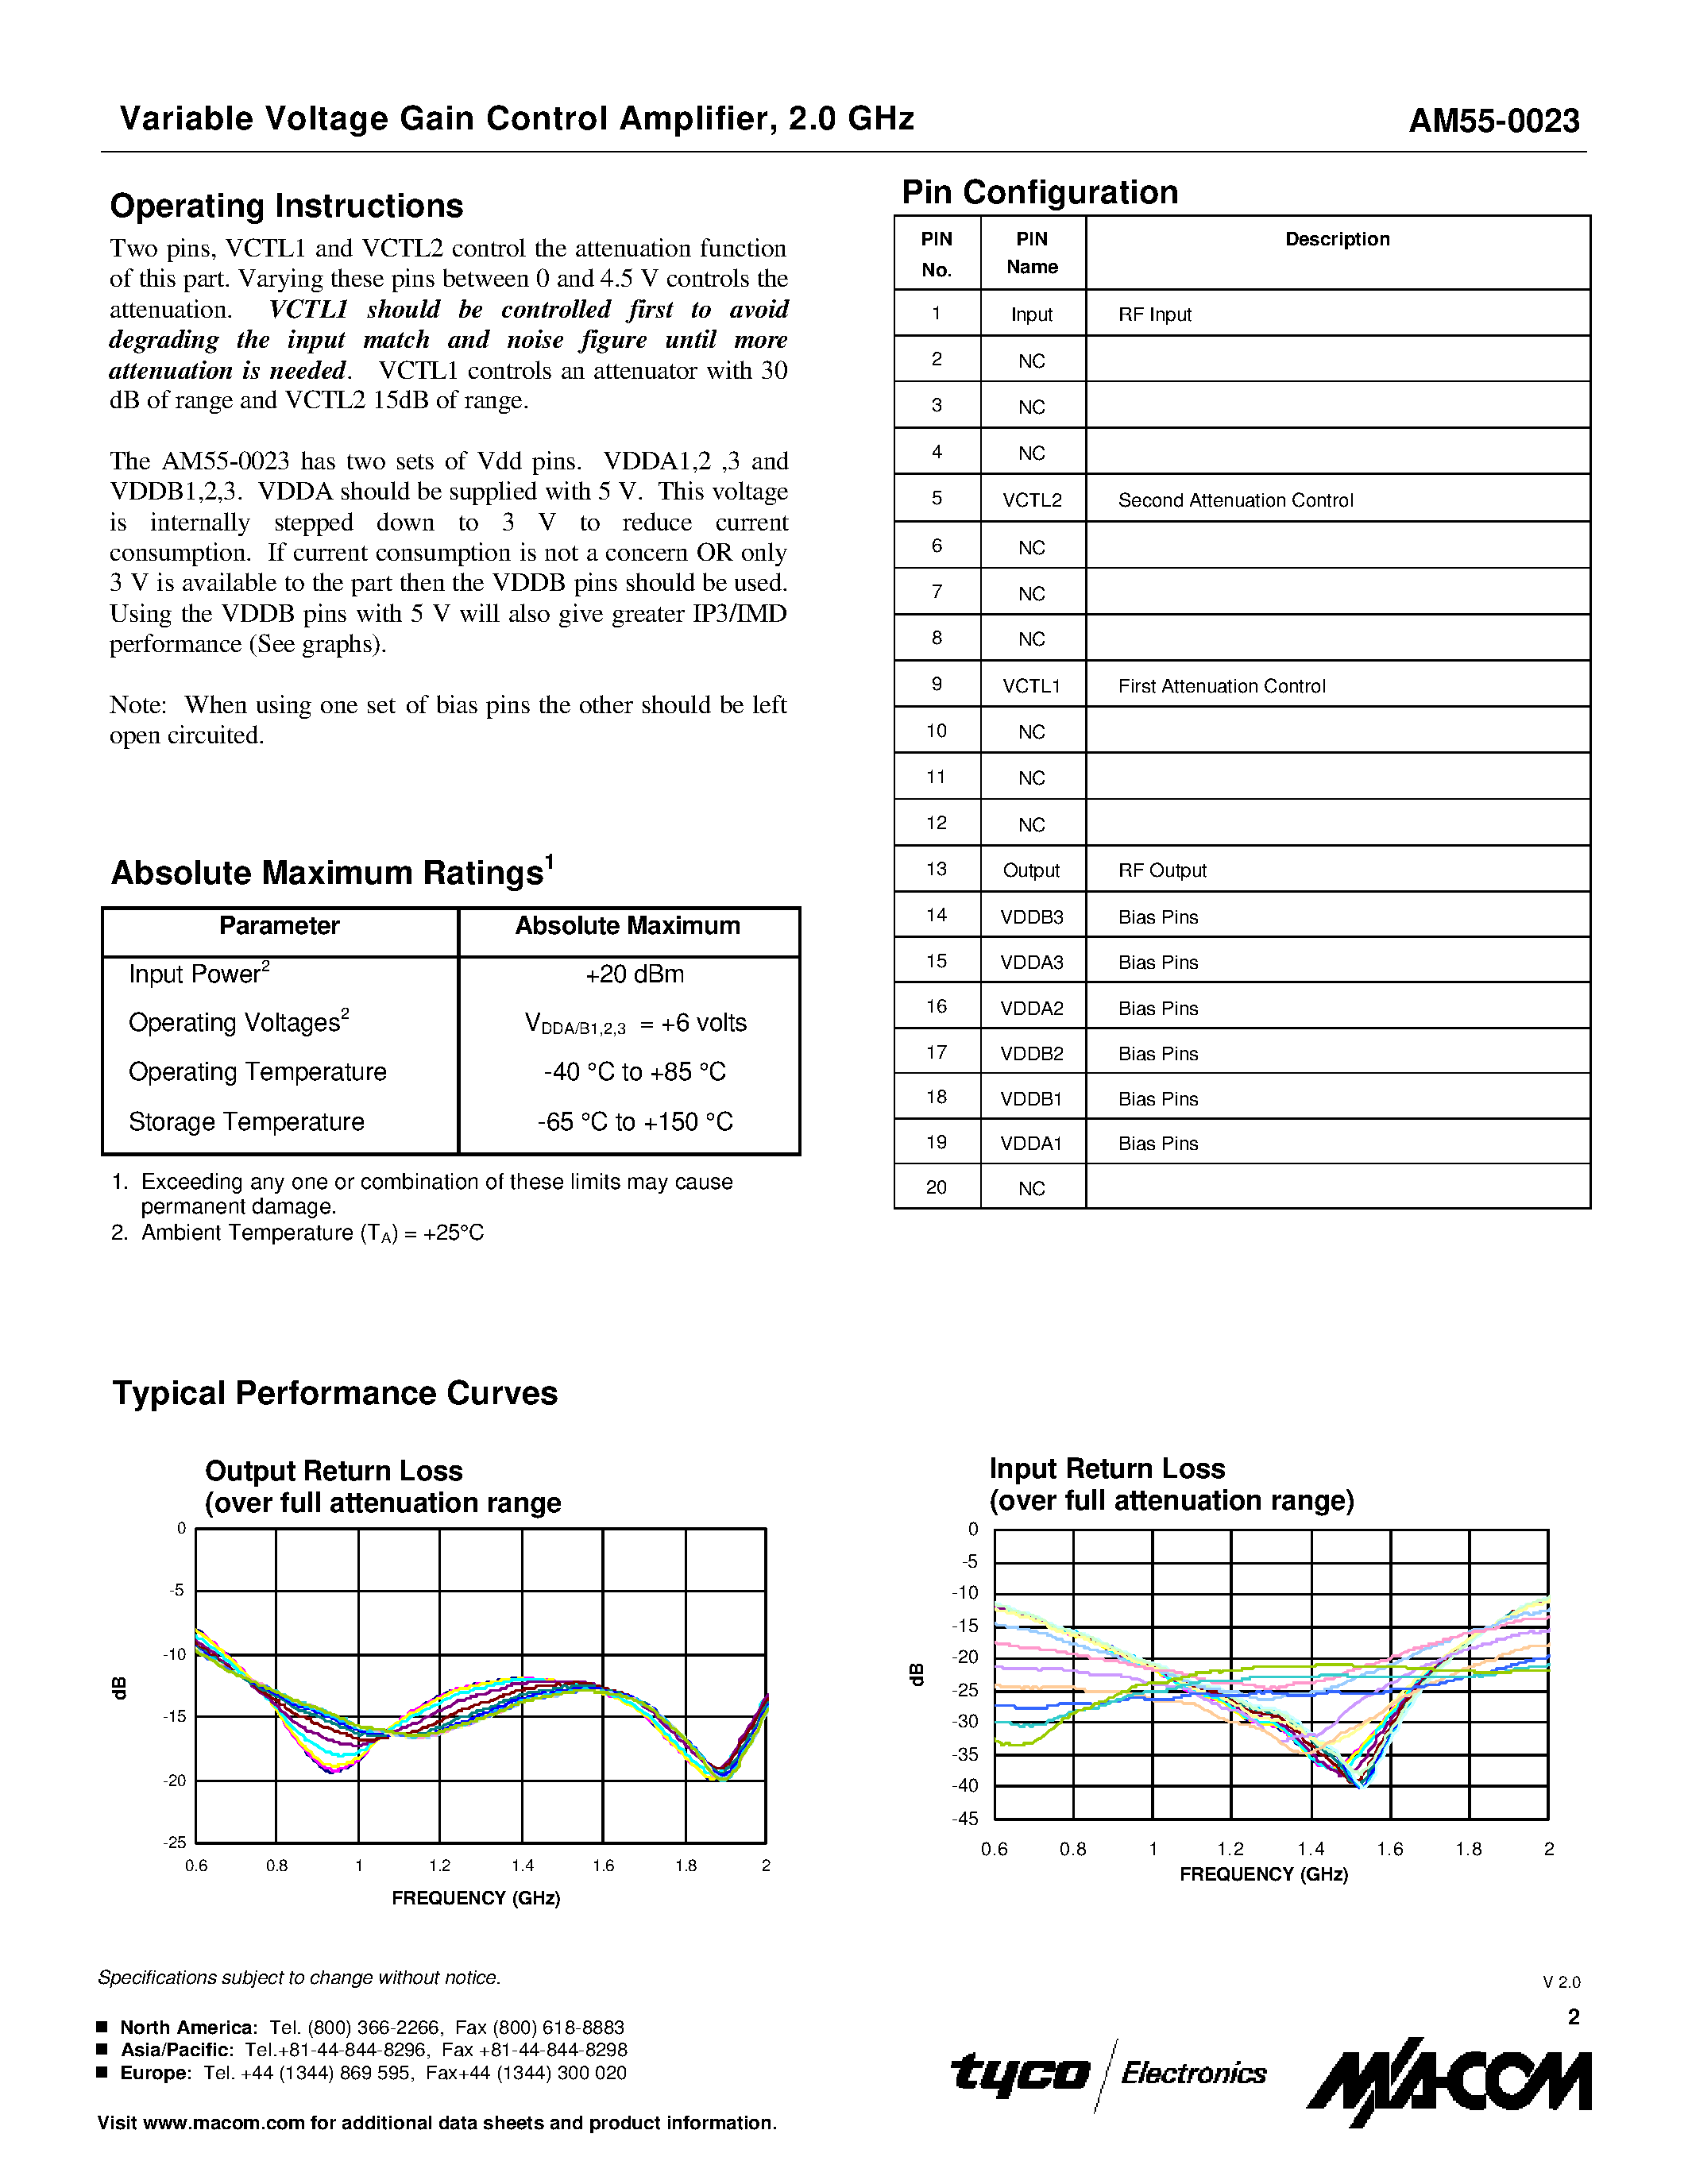 Datasheet AM55-0023TR - Variable Voltage Gain Control Amplifier 0.8 - 2.0 GHz page 2